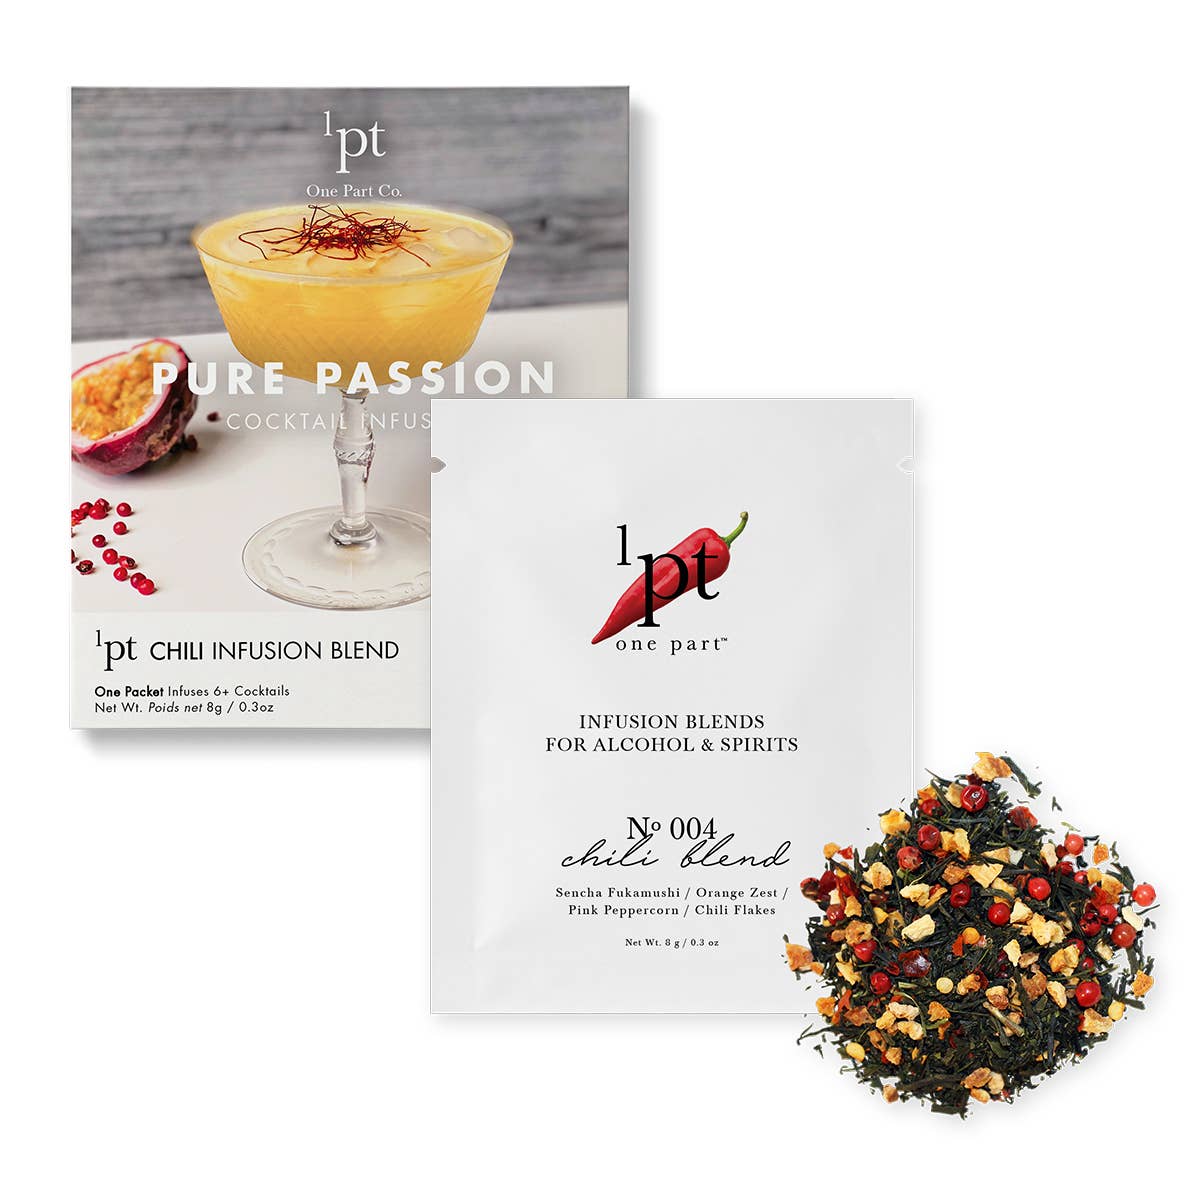 Pure Passion Cocktail Infusion Kit